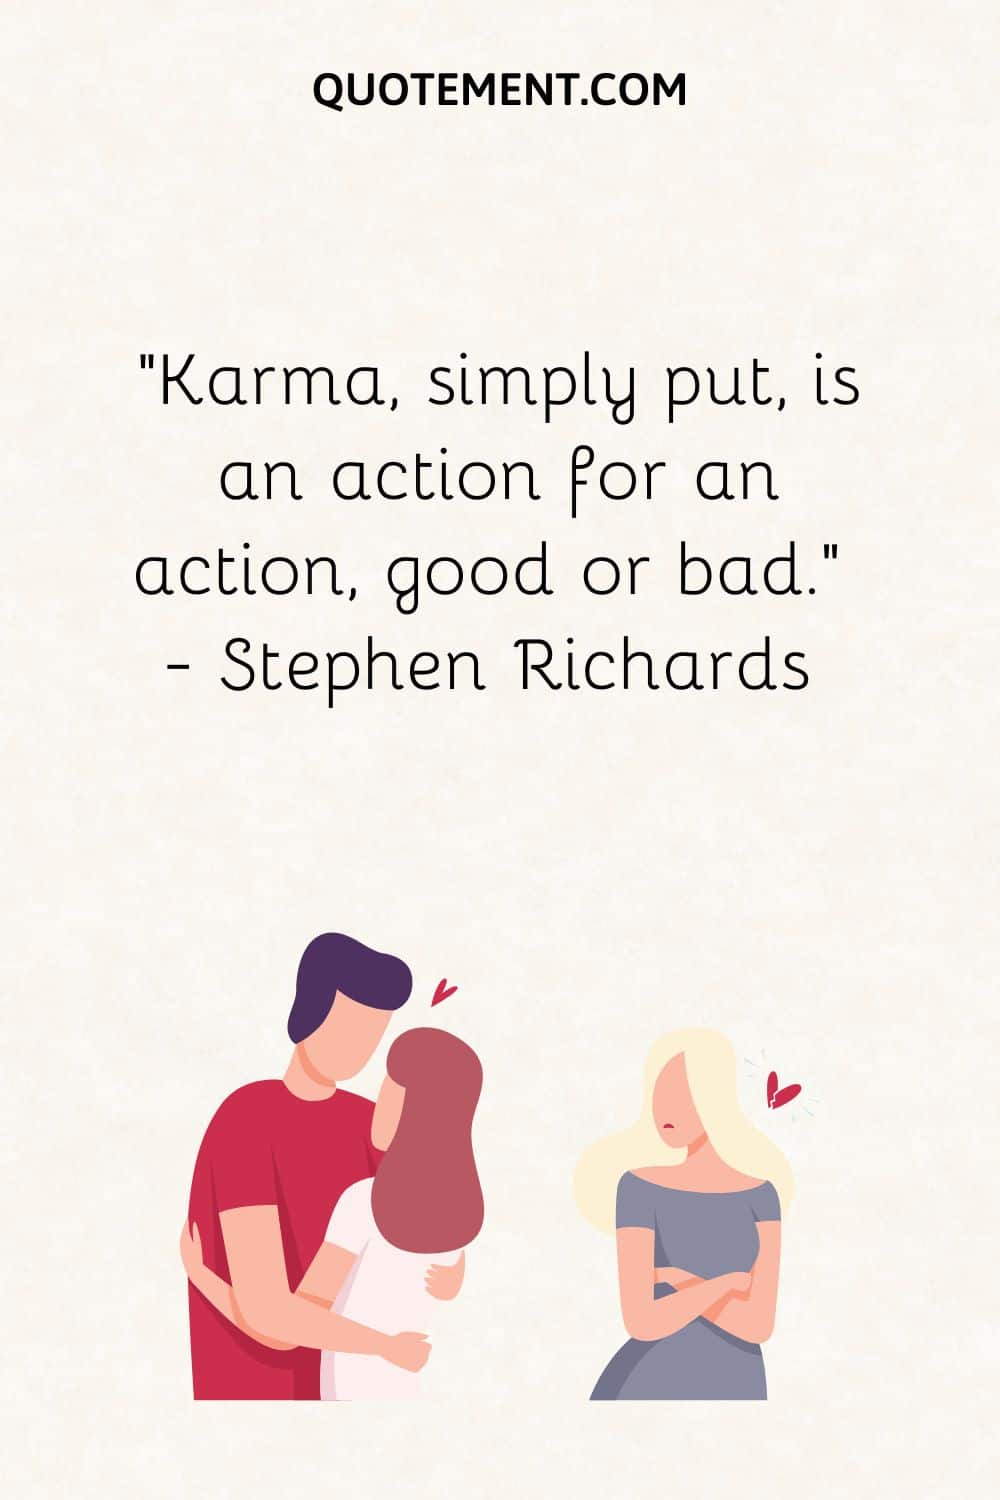 Karma, simply put, is an action for an action, good or bad